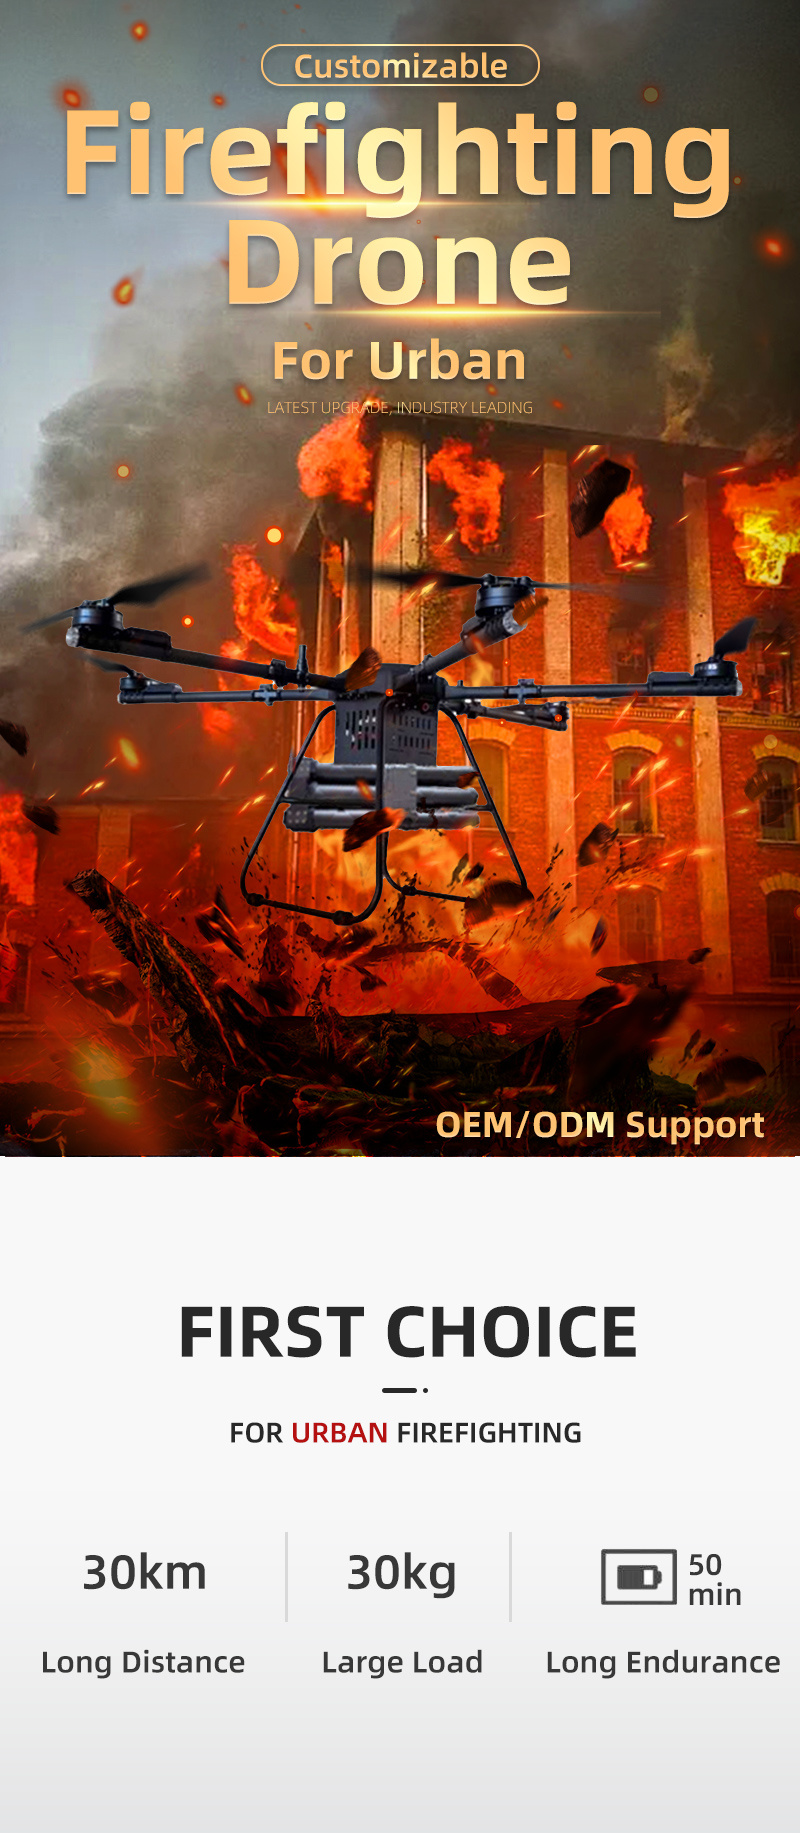 Remote Control Building Firefighting Heavy Lifting Load Long Range Customizable Industrial Drone